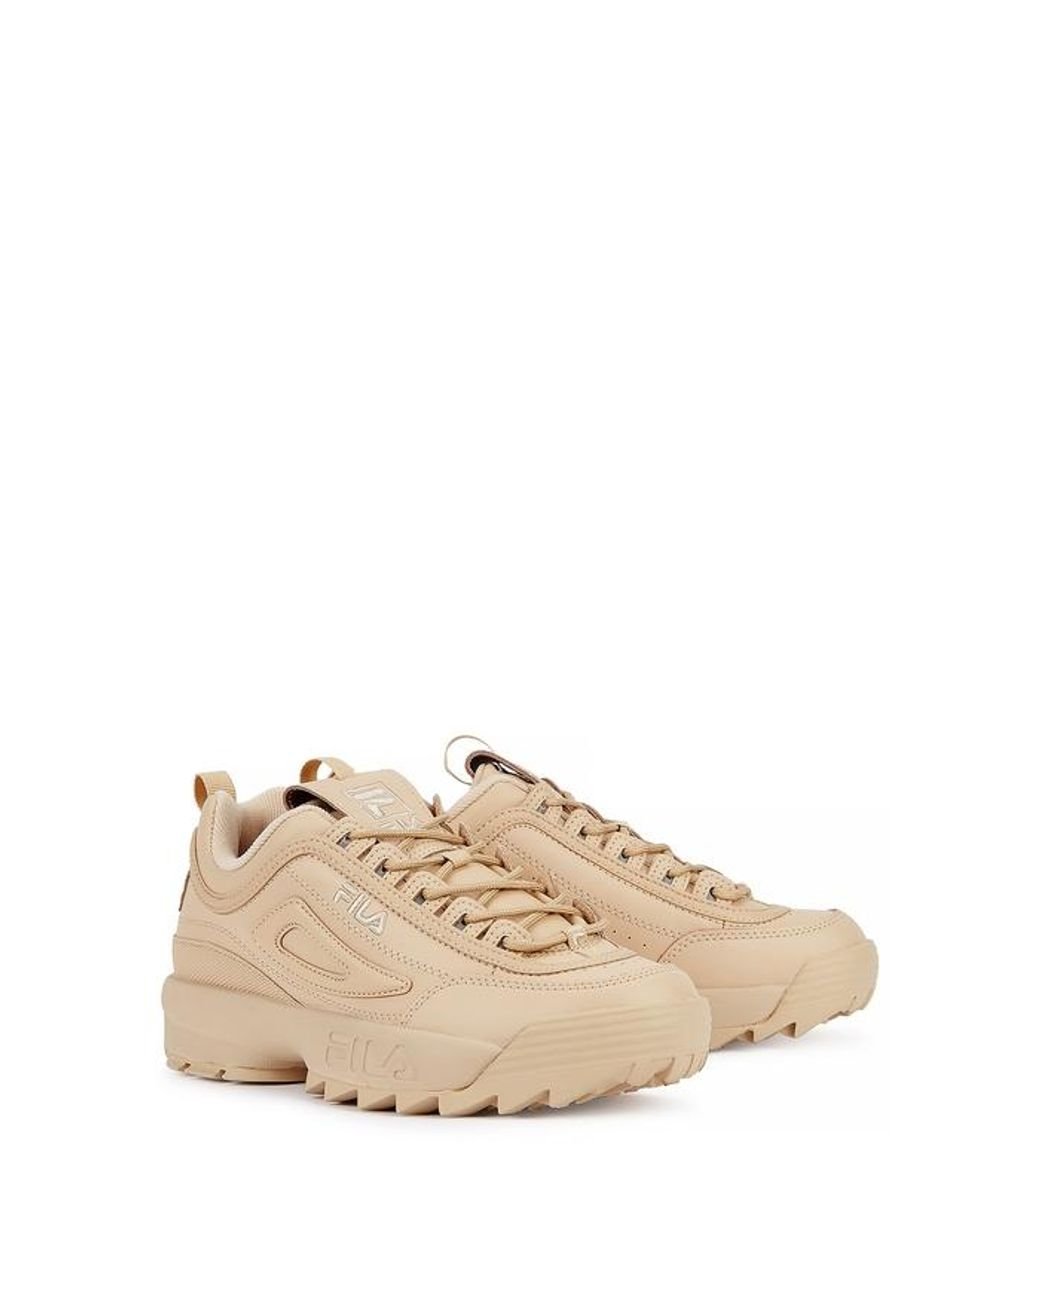 Fila Disruptor Ii Autumn Sand Leather Sneakers in Beige (Natural) | Lyst